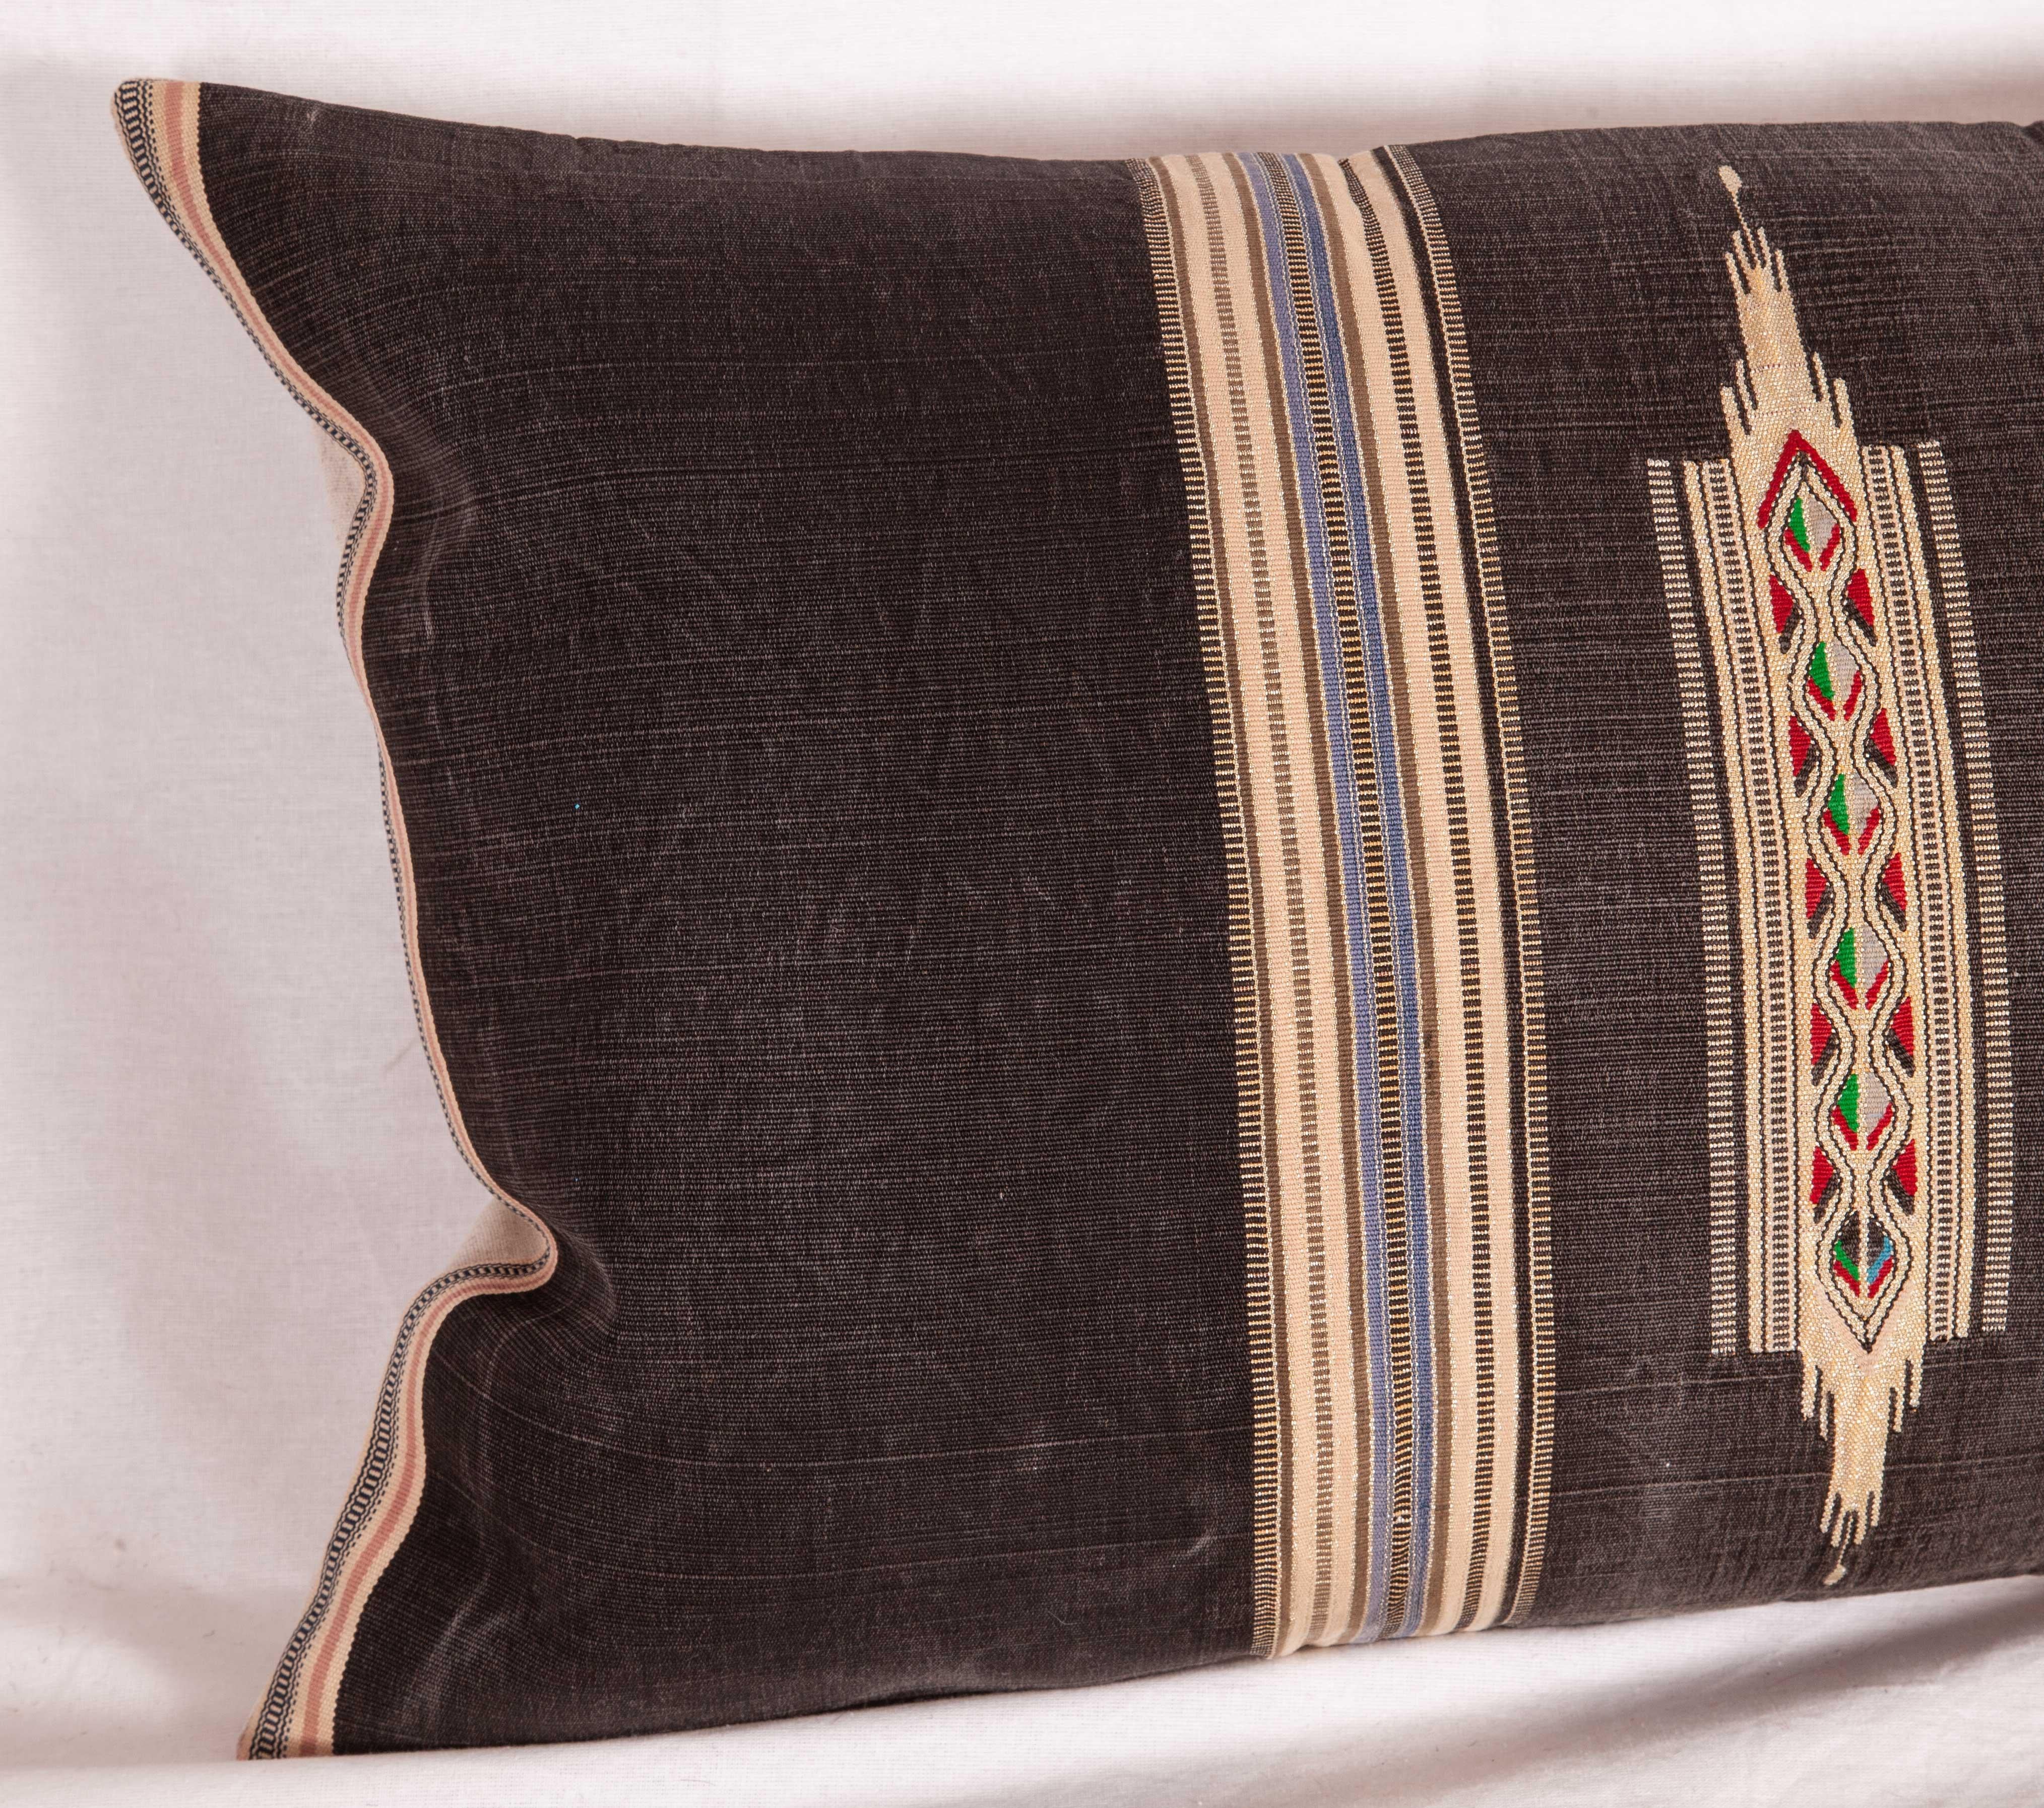 Kilim Antique Pillow Case Fashioned from an Early 20th Century Tapestry from Lebonon